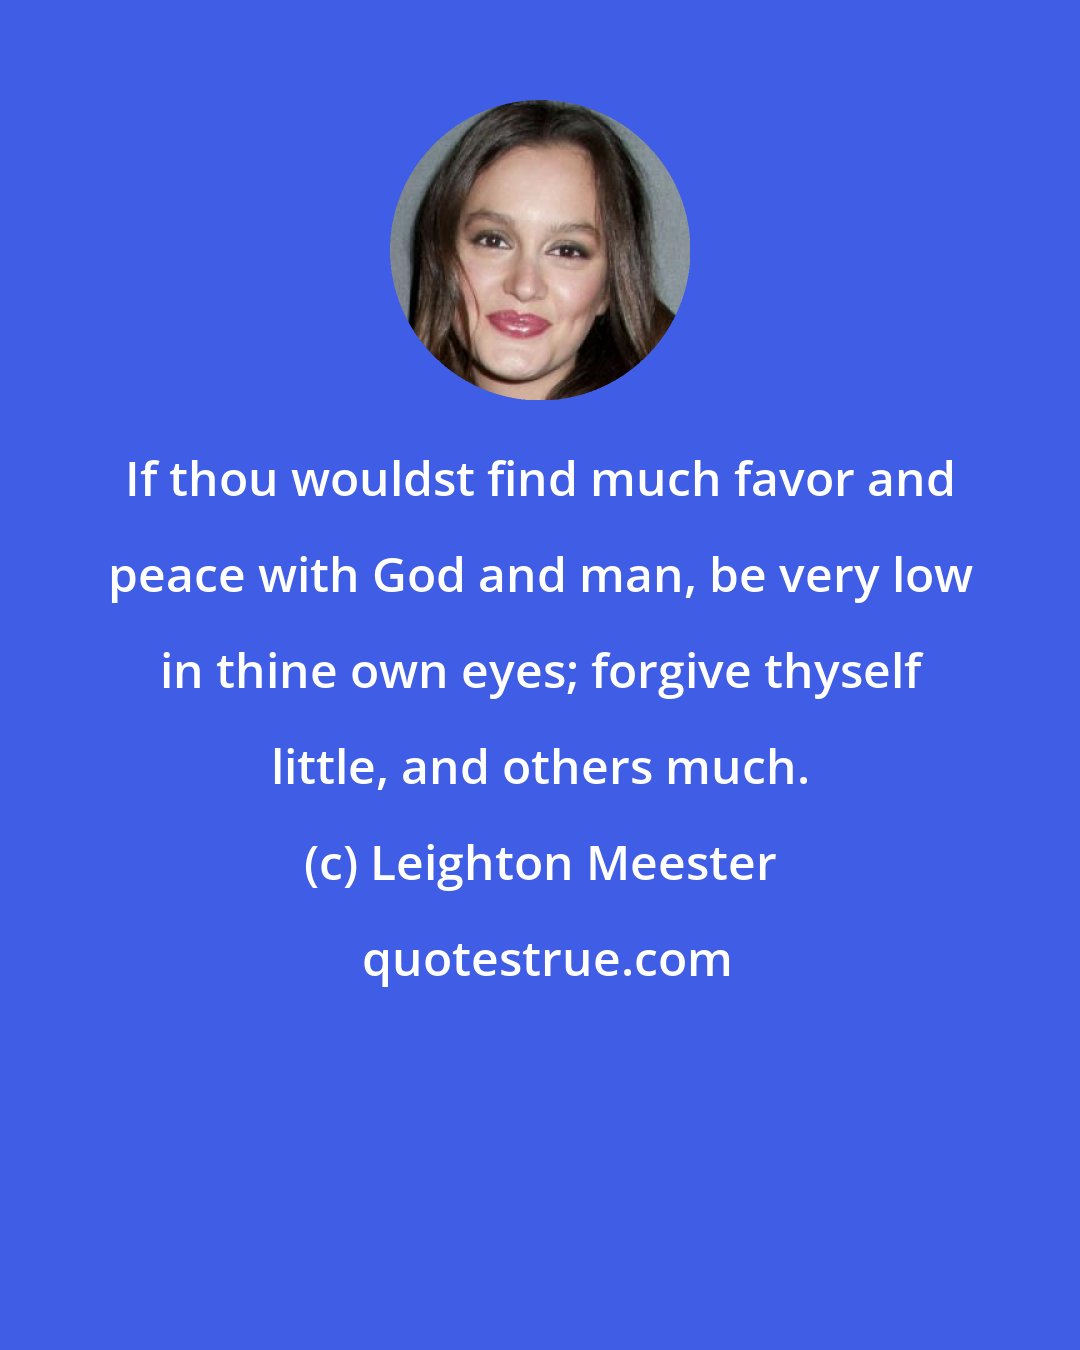 Leighton Meester: If thou wouldst find much favor and peace with God and man, be very low in thine own eyes; forgive thyself little, and others much.